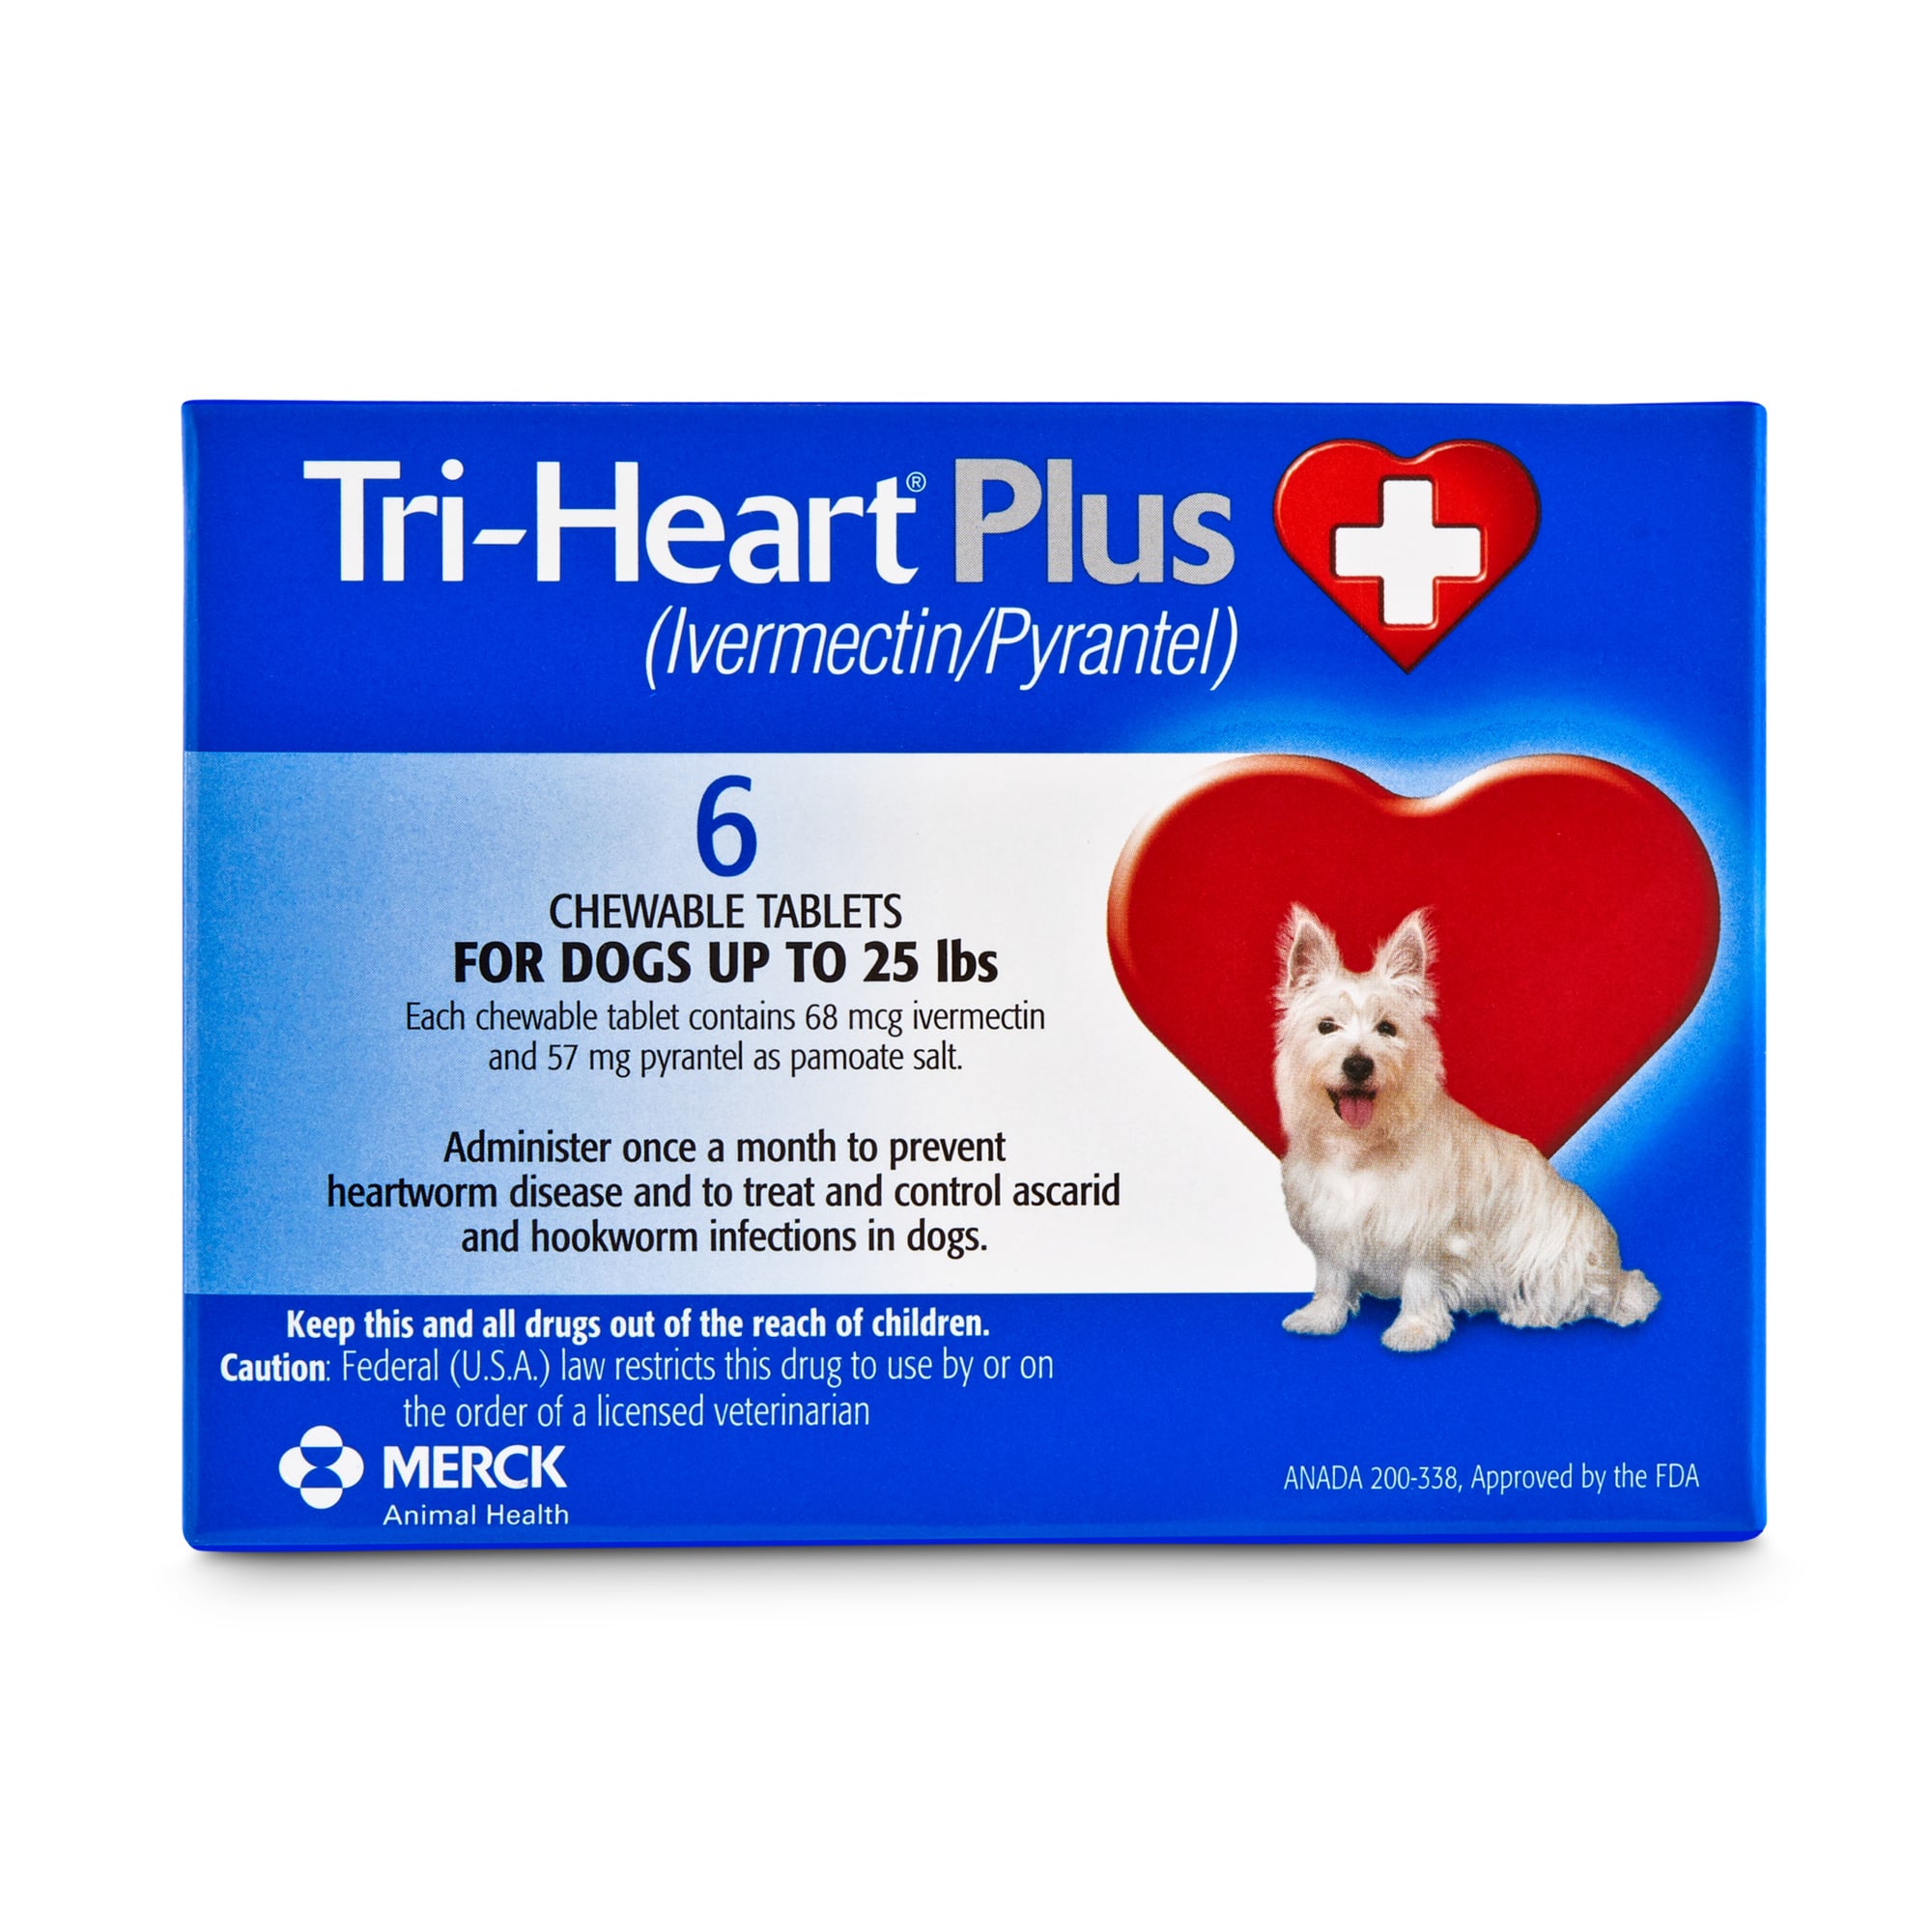 chicken-hearts-for-dogs-sale-here-save-56-jlcatj-gob-mx